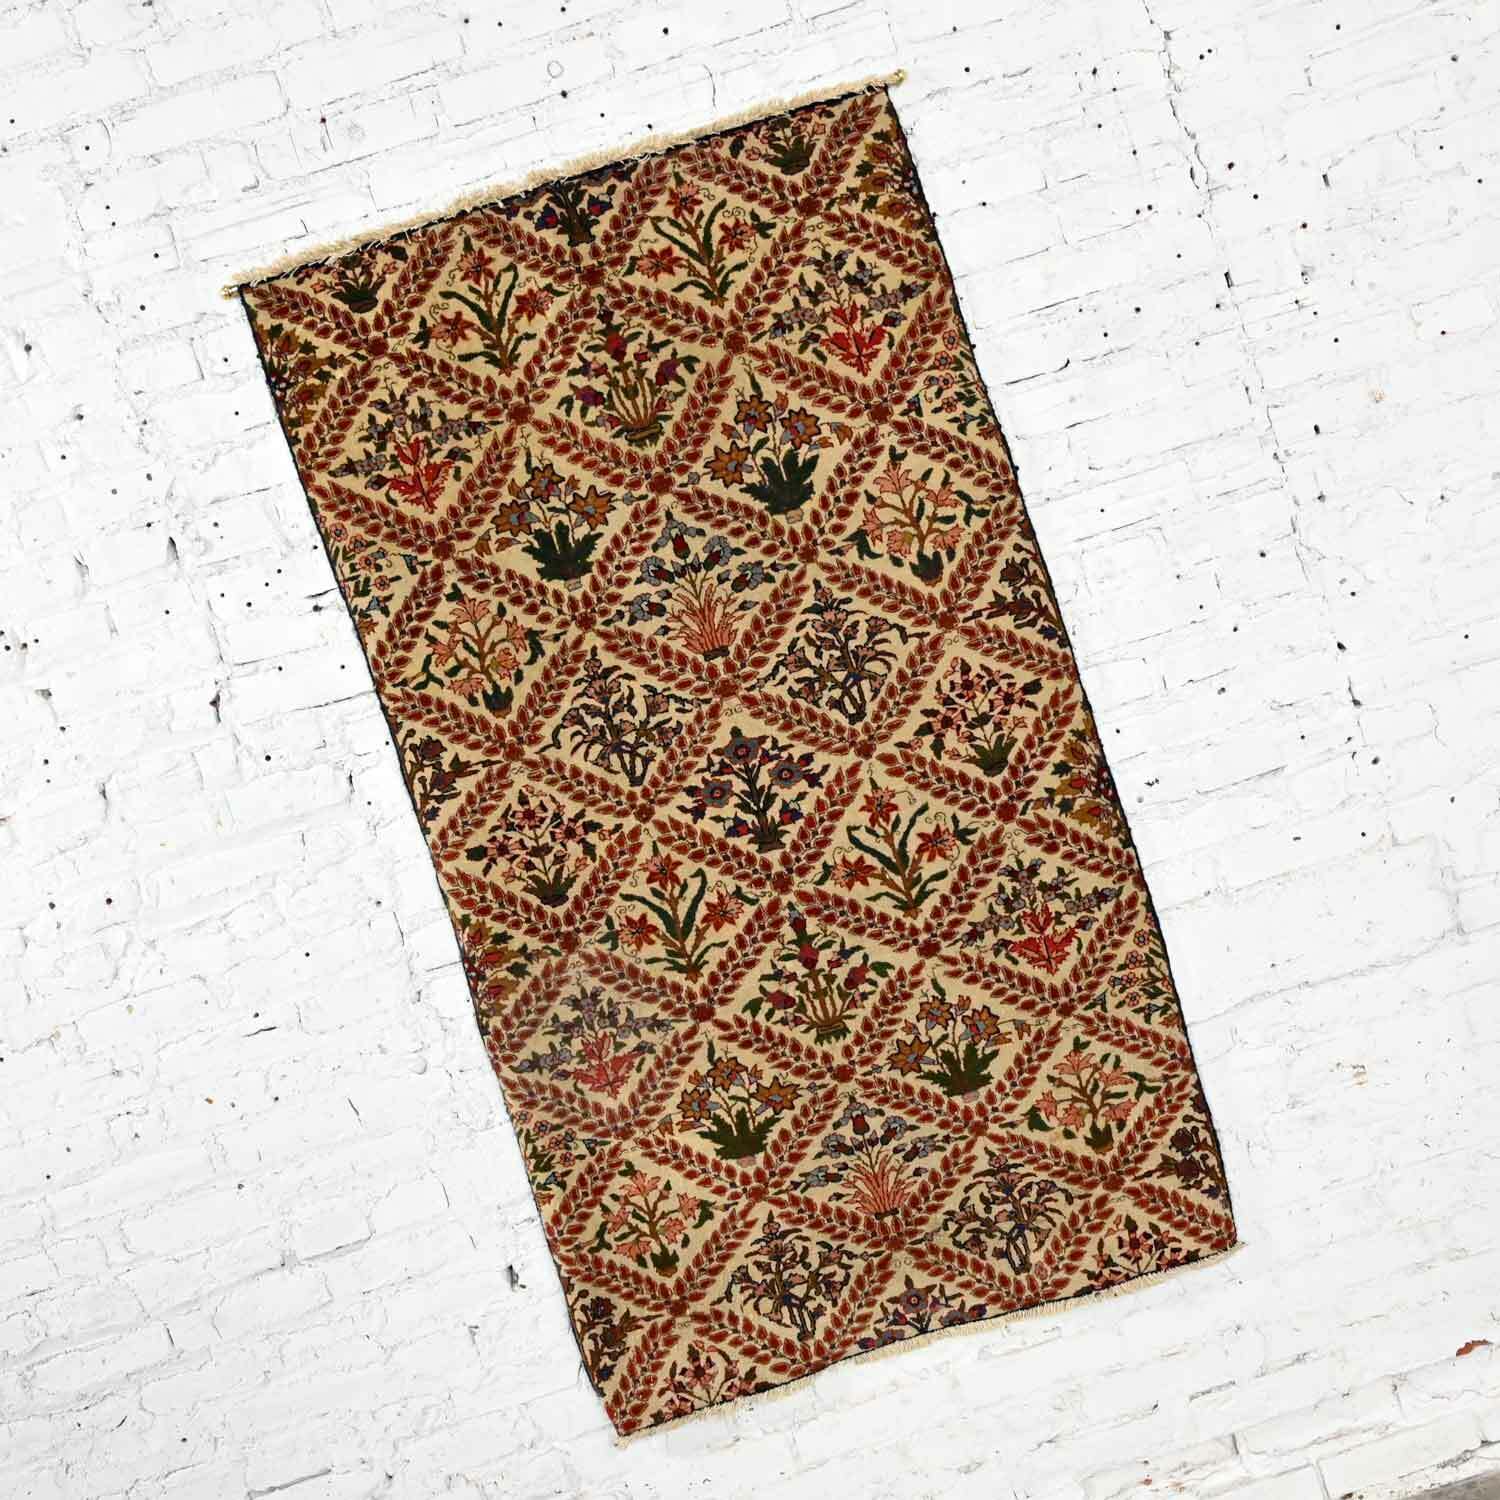 Antique Persian Oriental Hand Woven Wool on Cotton Leaf & Floral Rug Wall Hangin